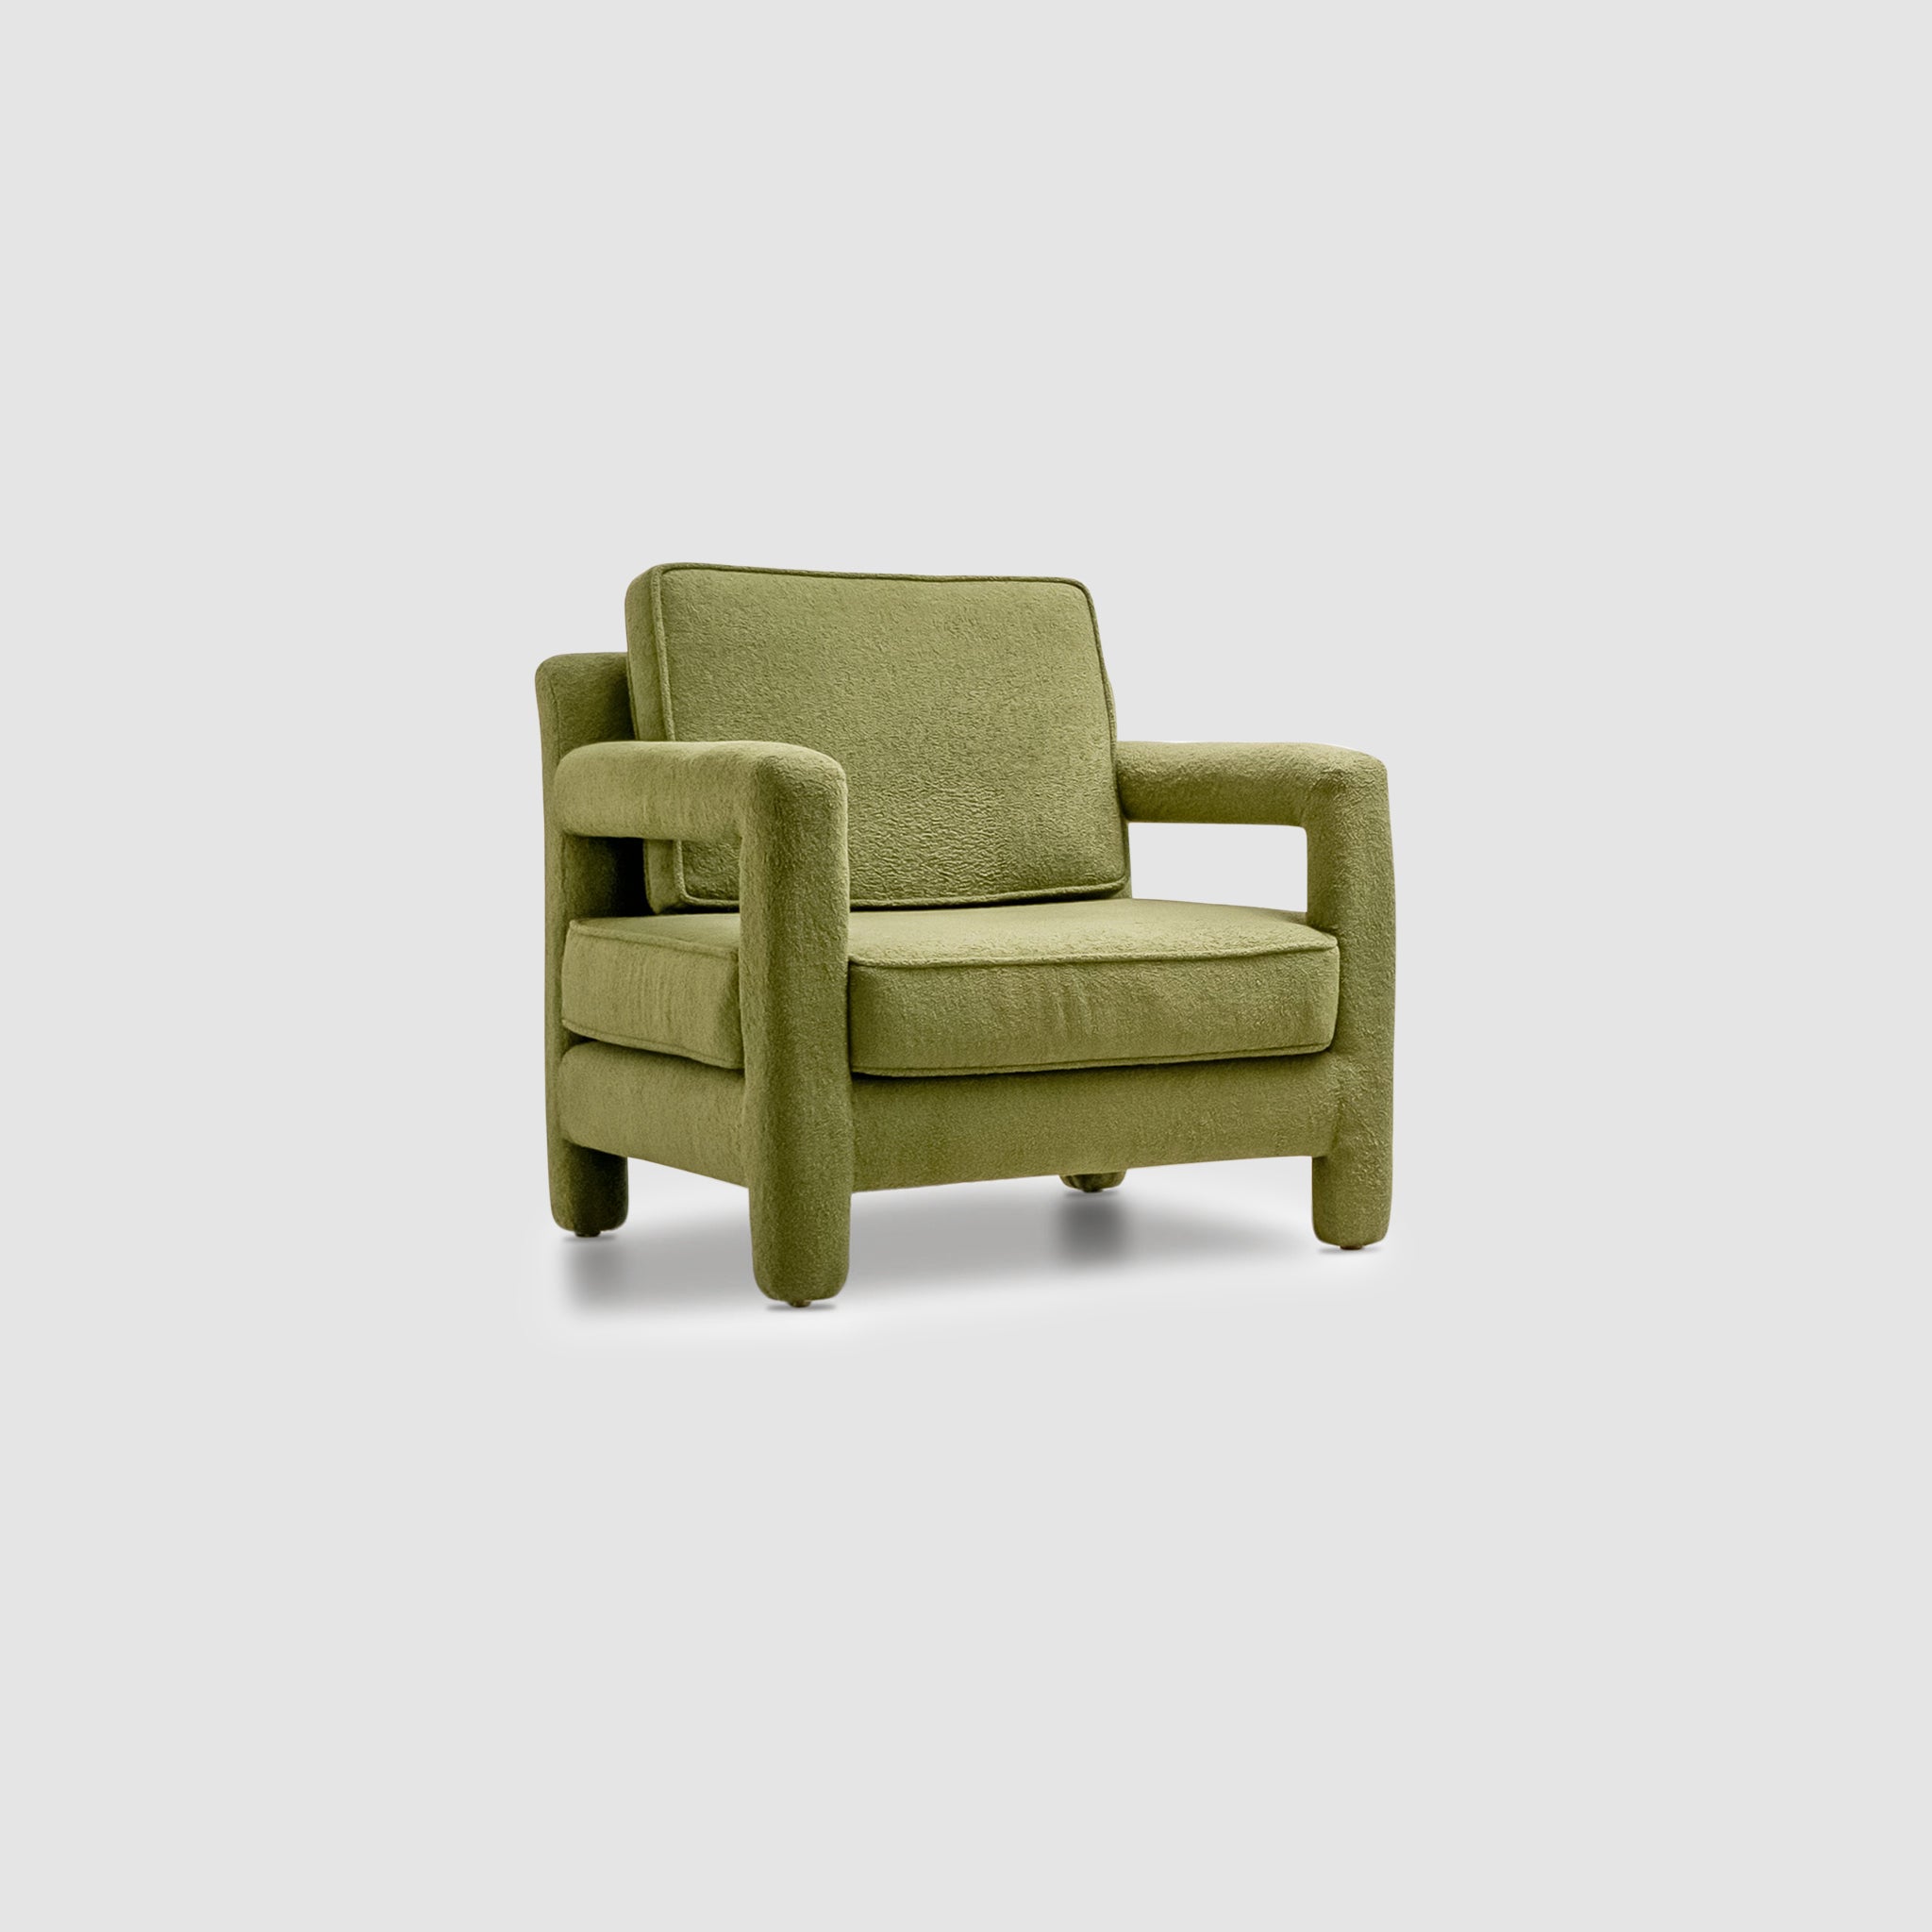 Angled view of The Parsons Accent Chair featuring soft green upholstery, plush cushioning, and rounded armrests, set against a plain background.